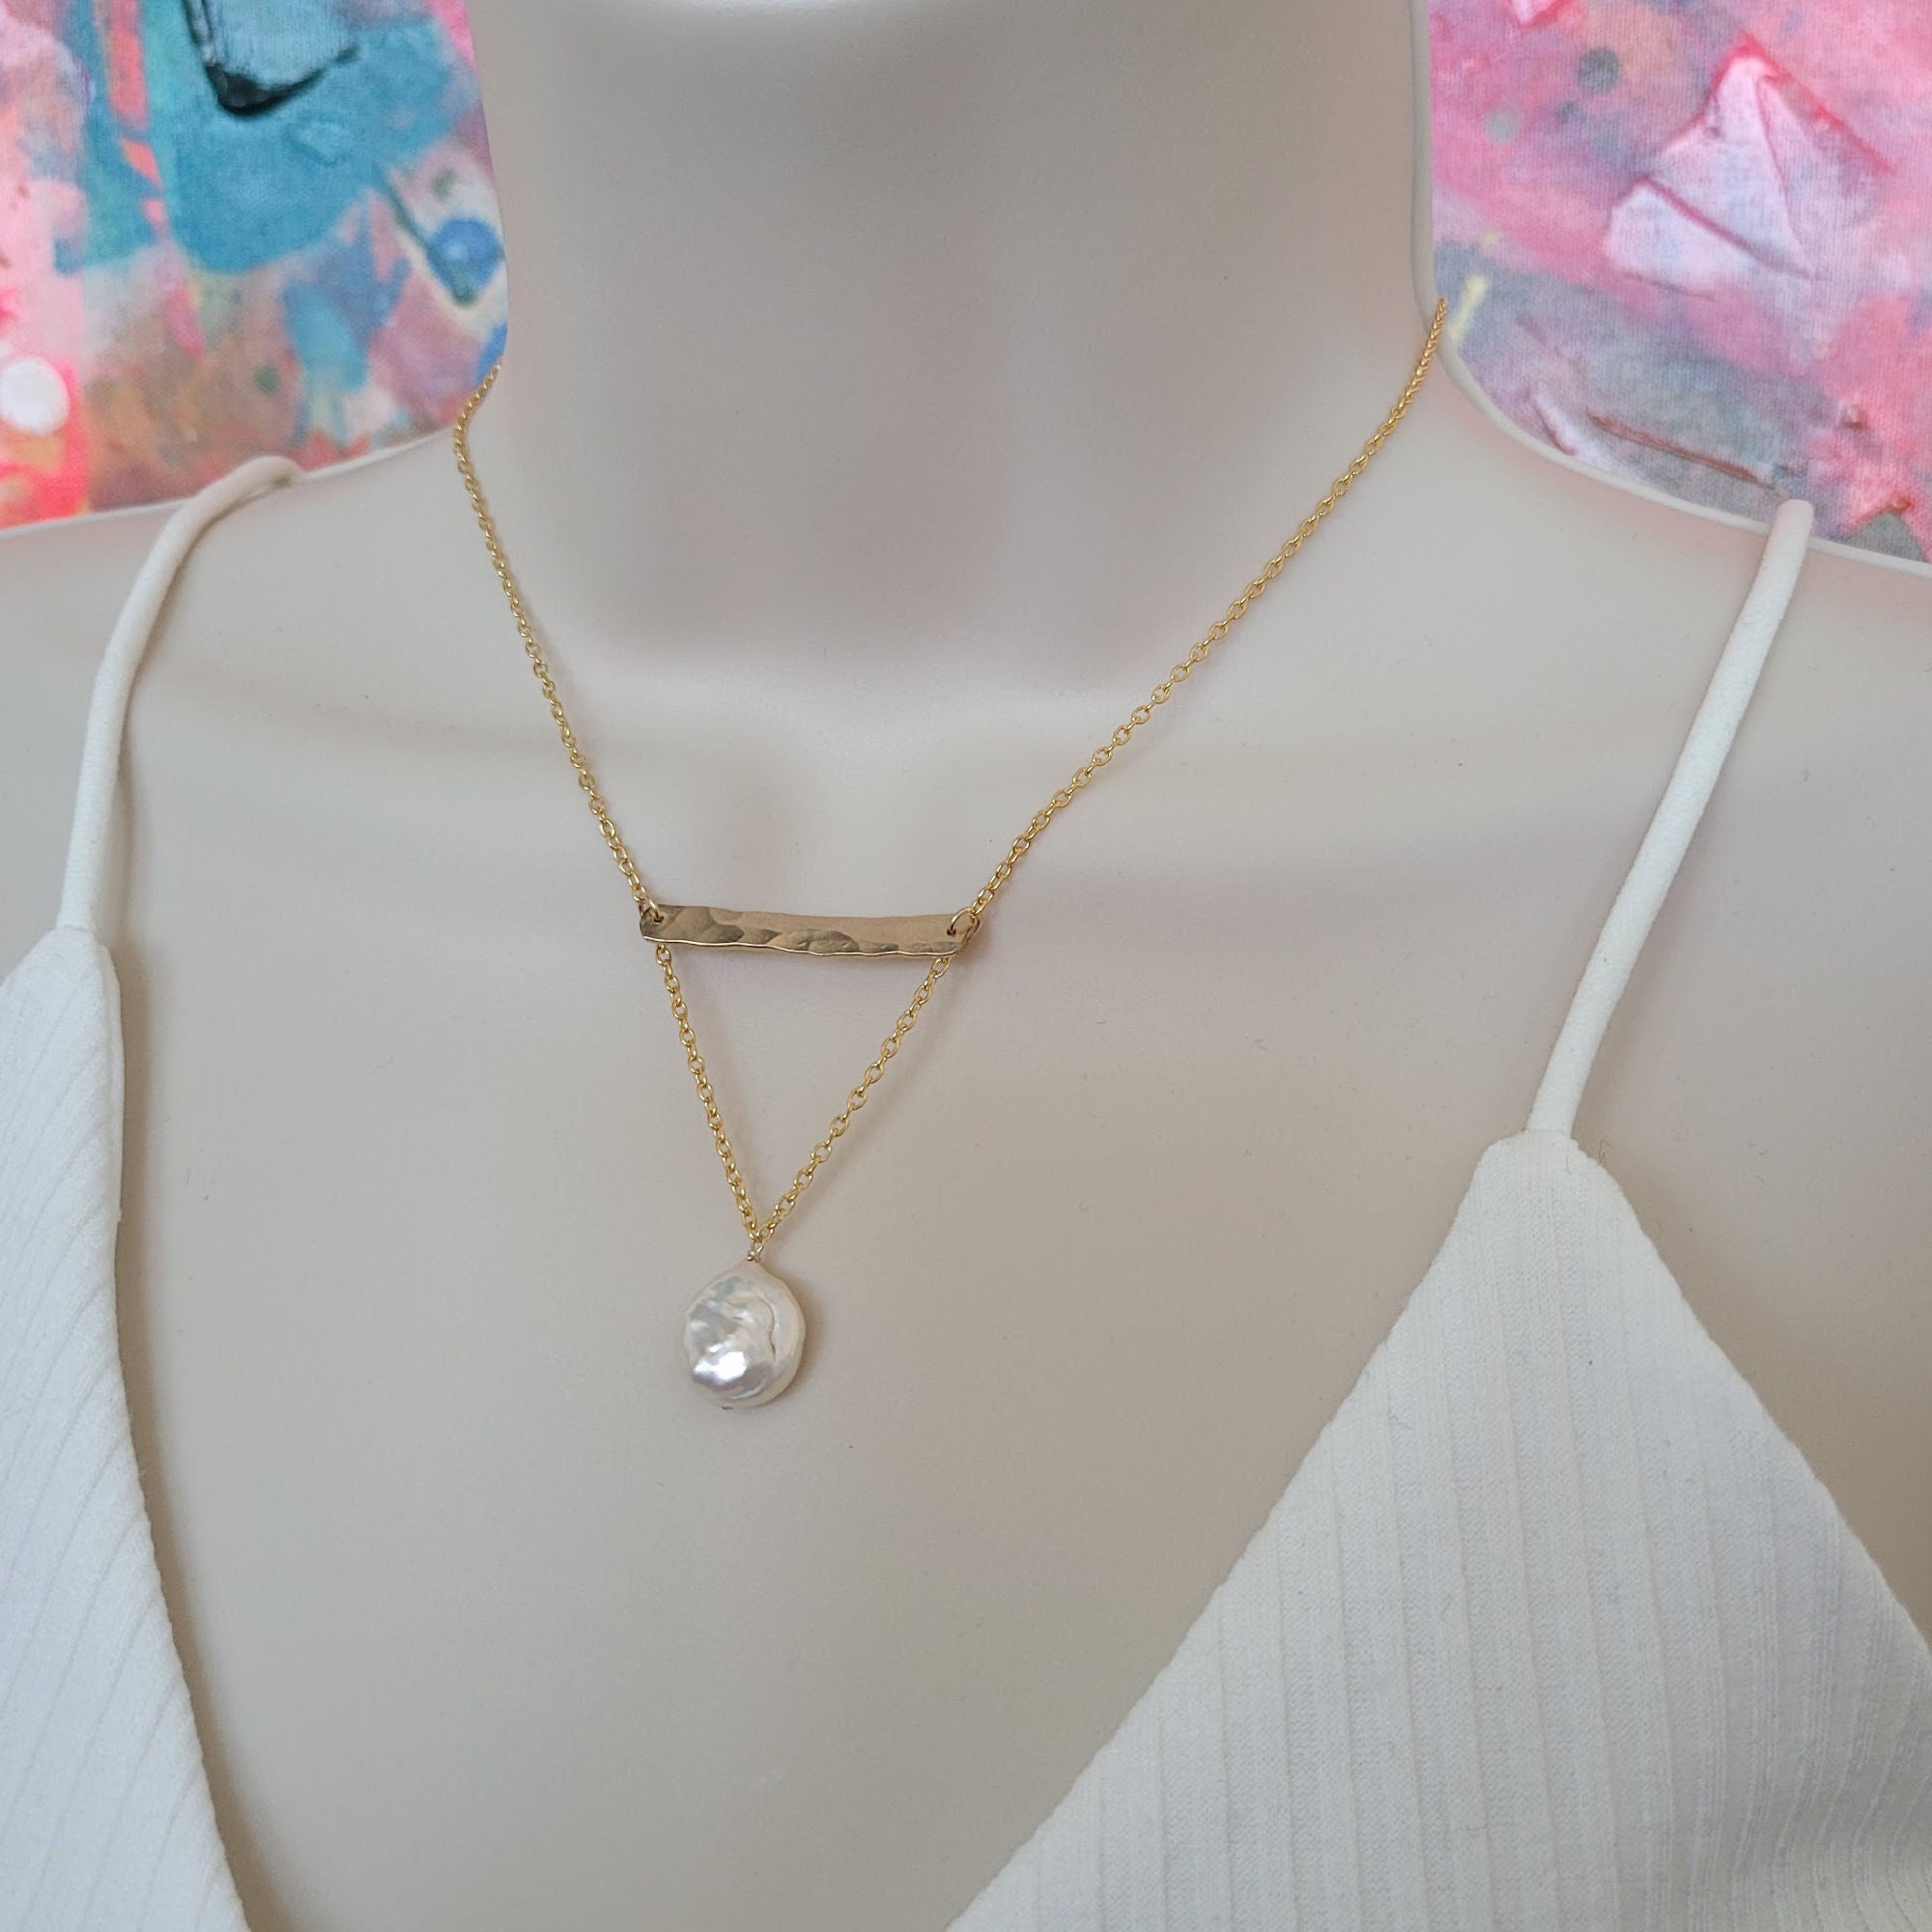 Balance Necklace with Coin Pearl • Silver or Gold